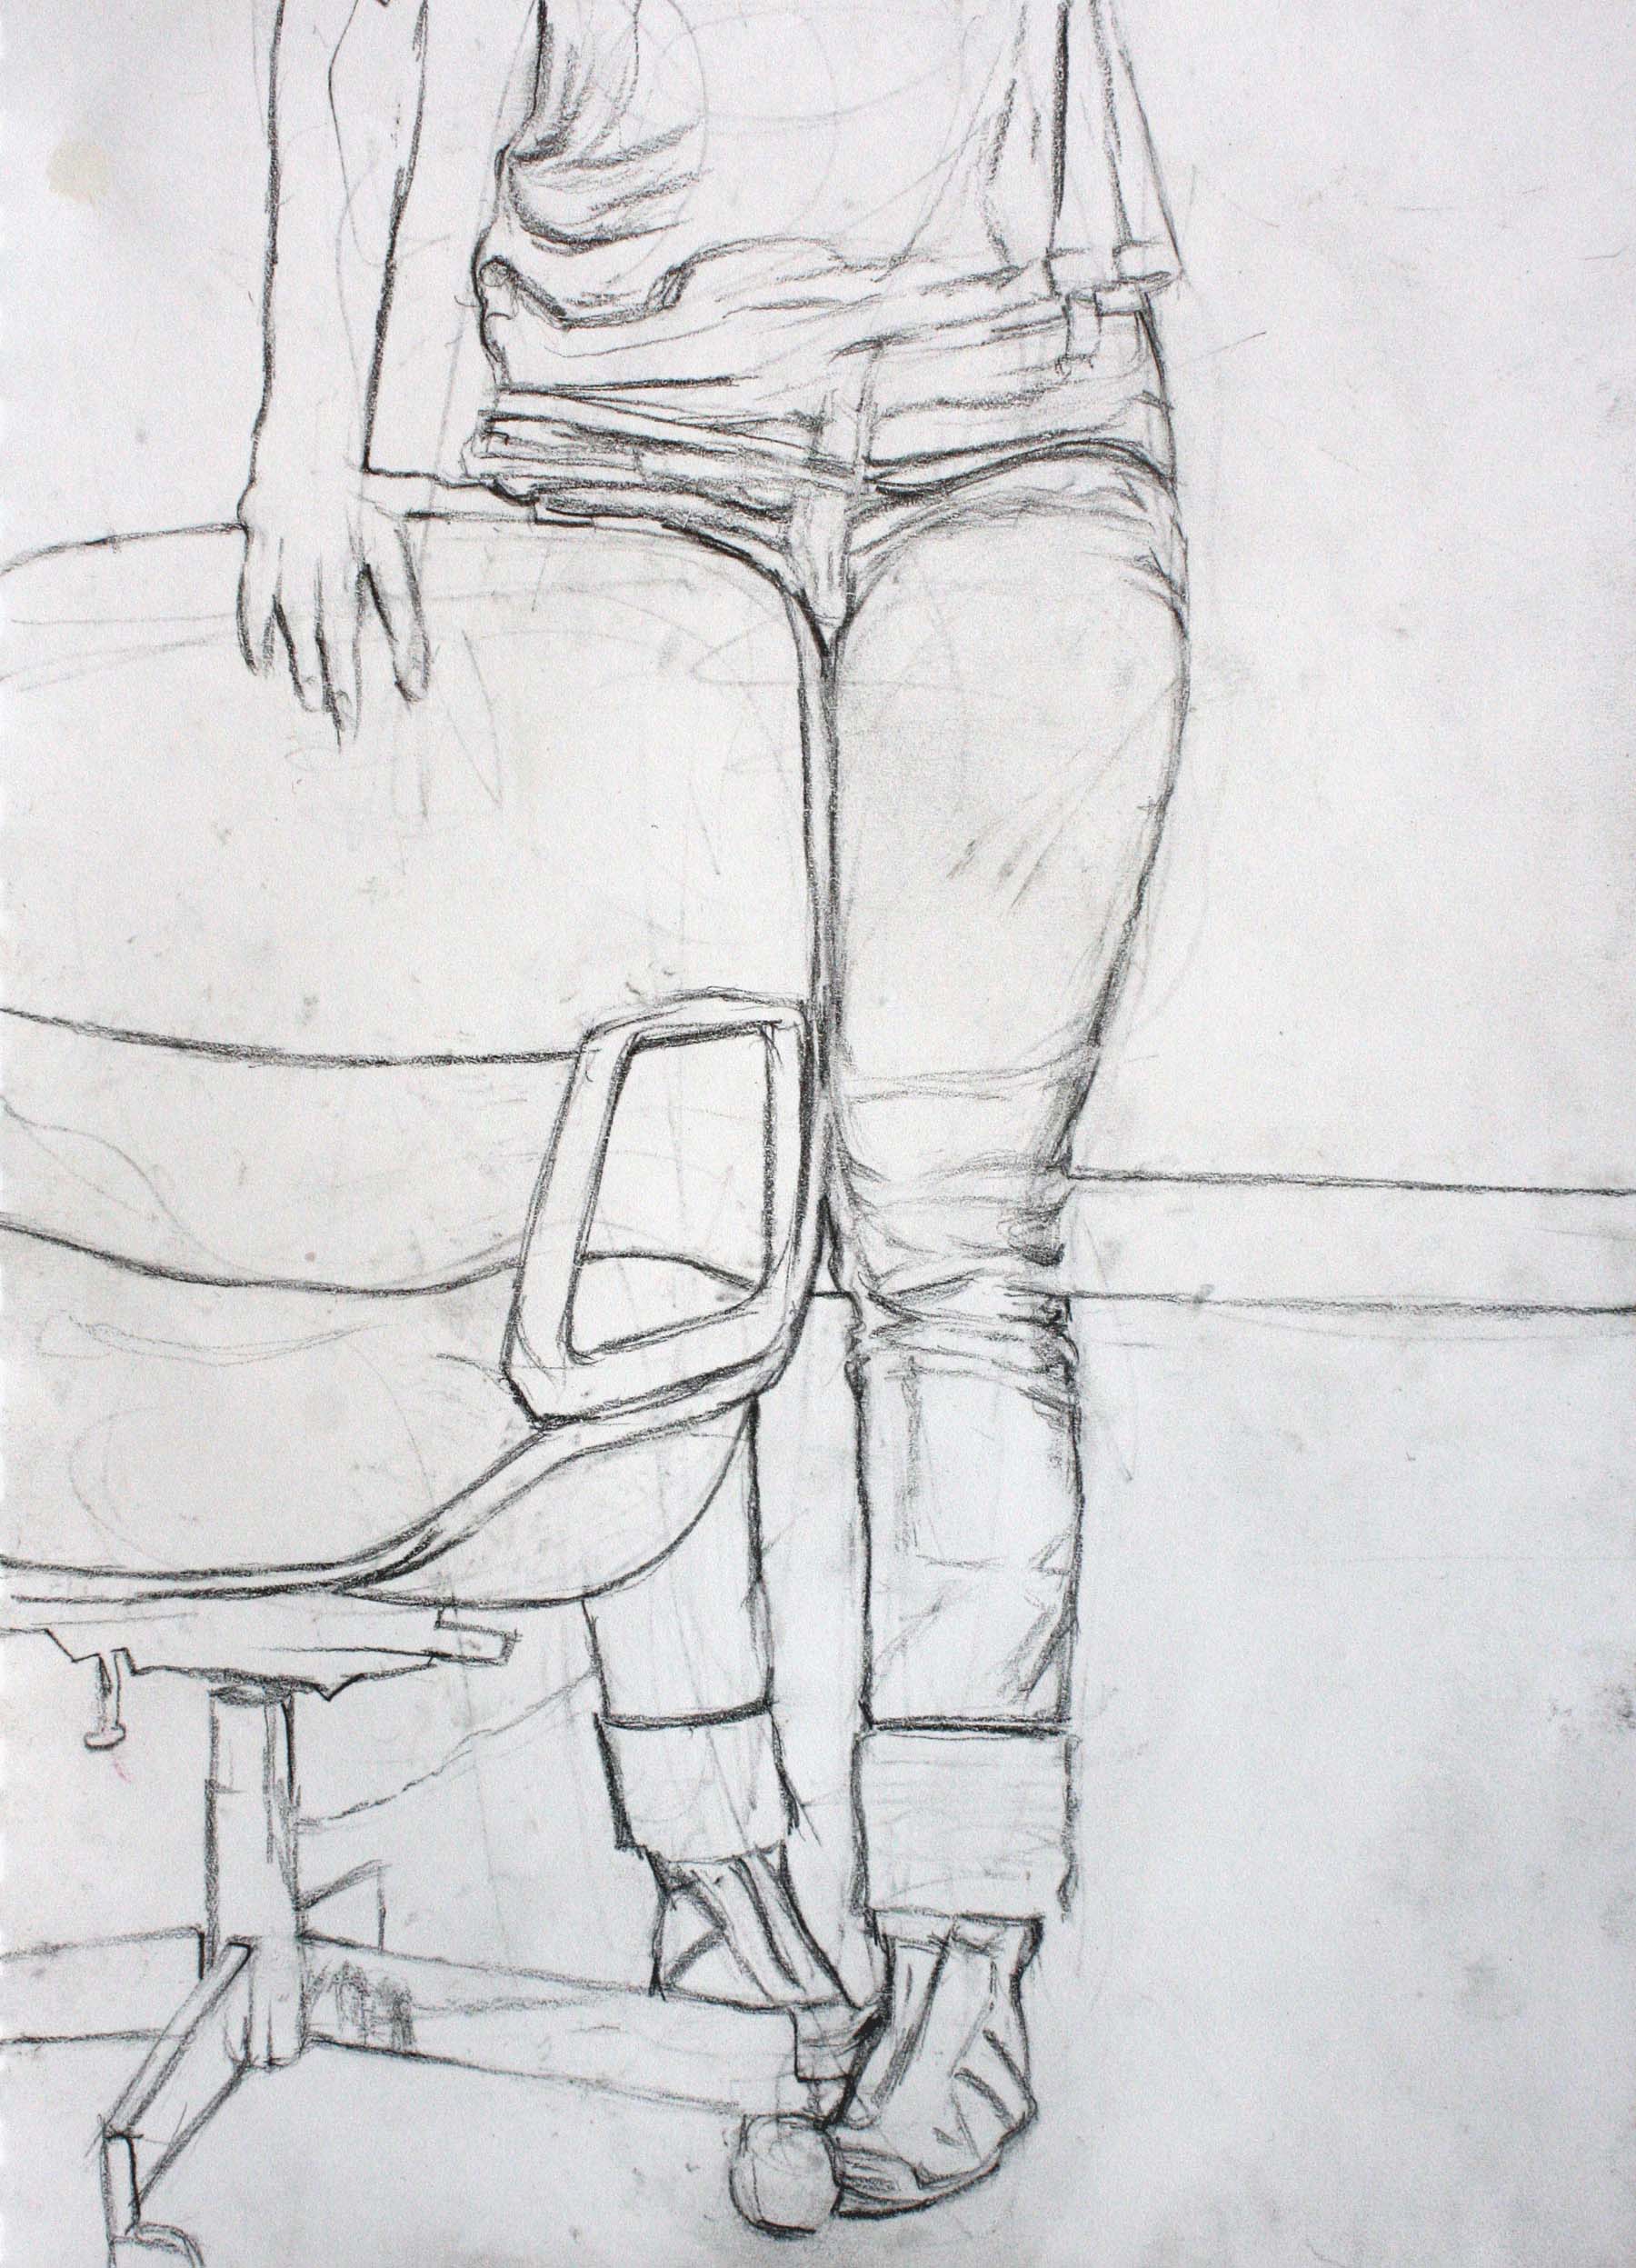   Woman with Office Chair , 2010. Graphite on paper, 12 x 9" 